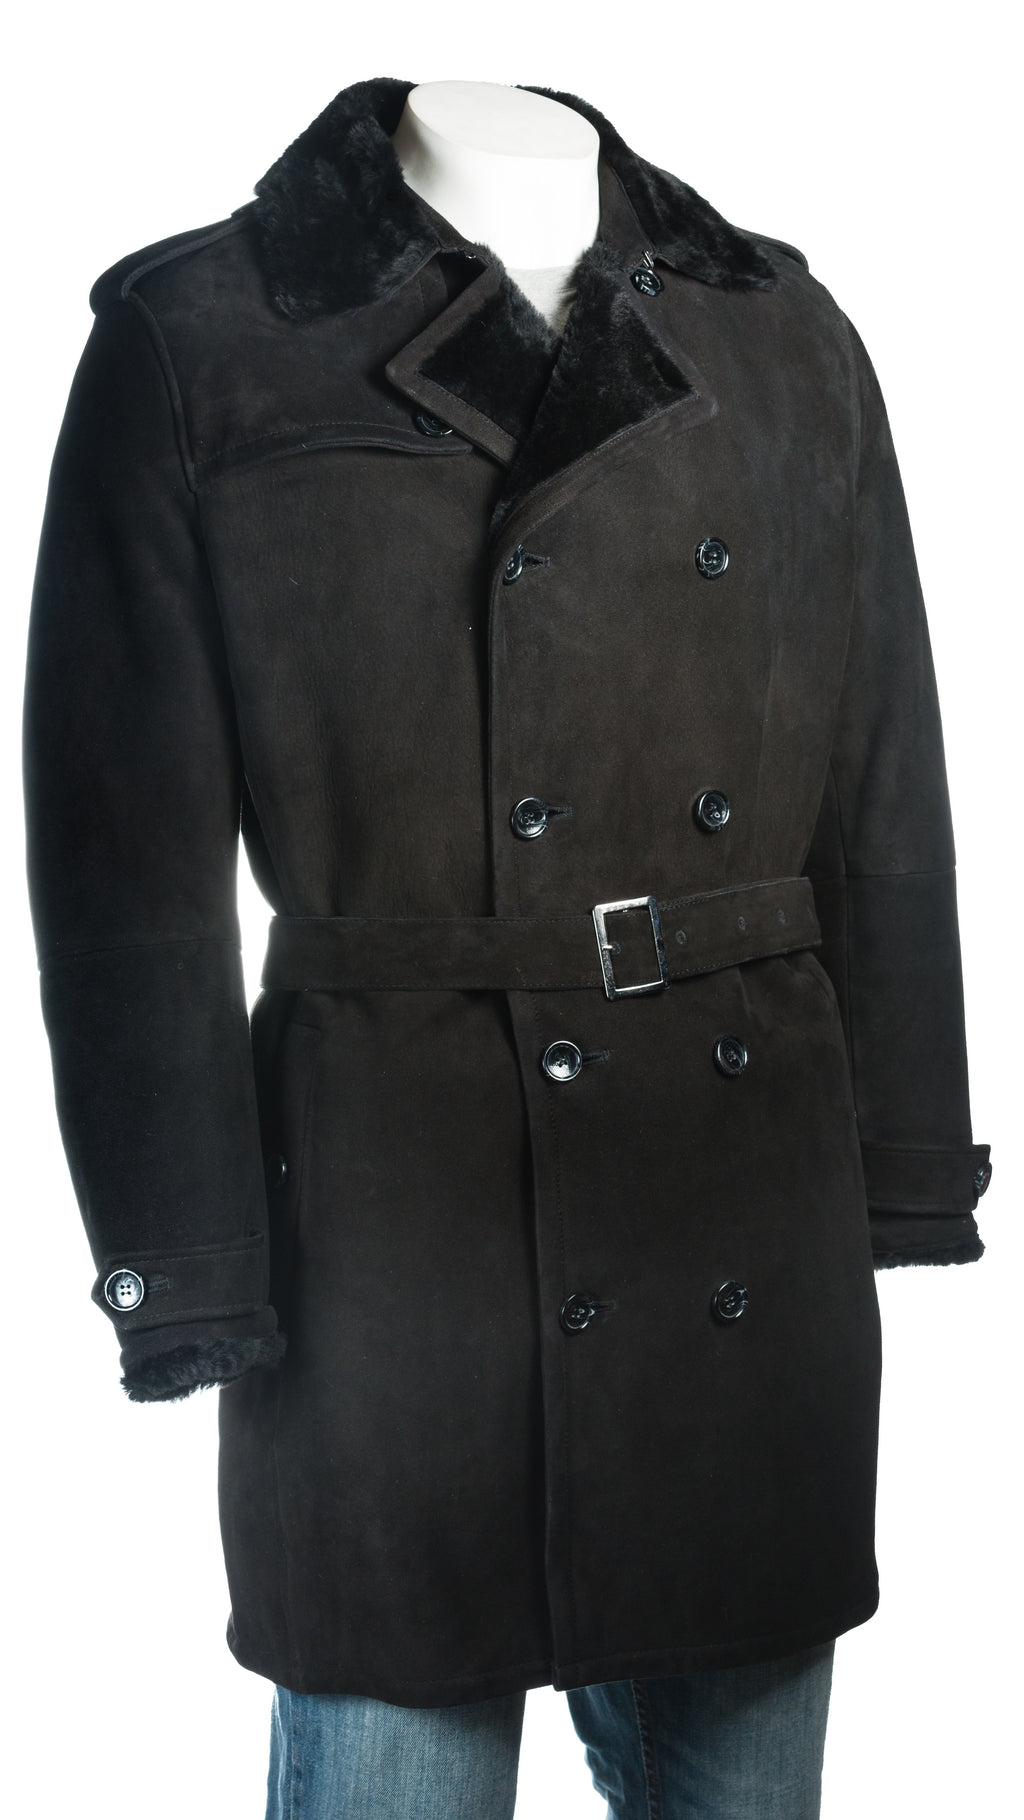 Men's Black Shearling Sheepskin 3/4 Double Breasted Button Up Suede Finish Coat: Stefano